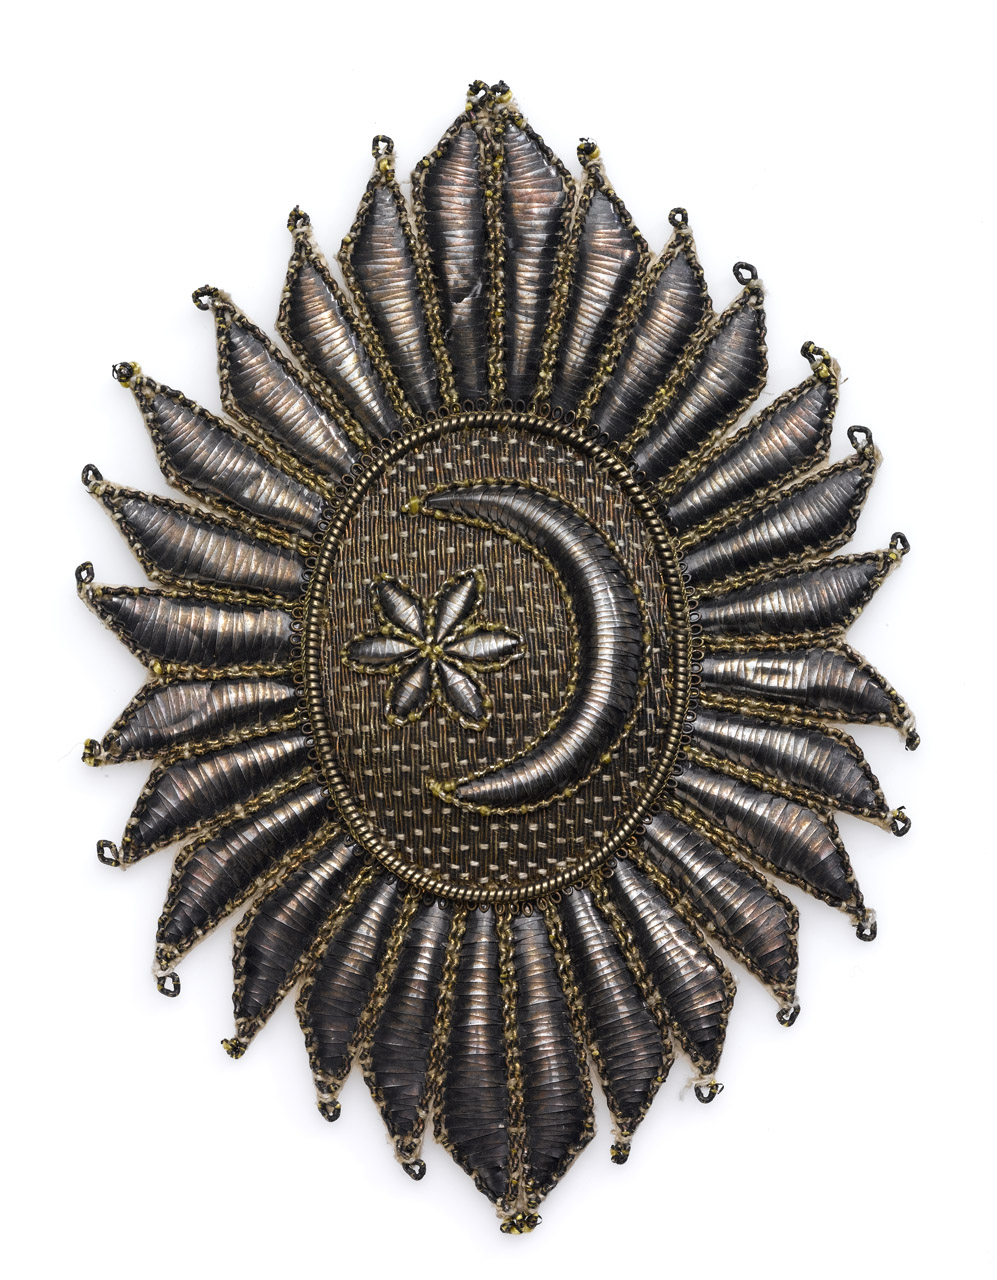 Order of the Crescent